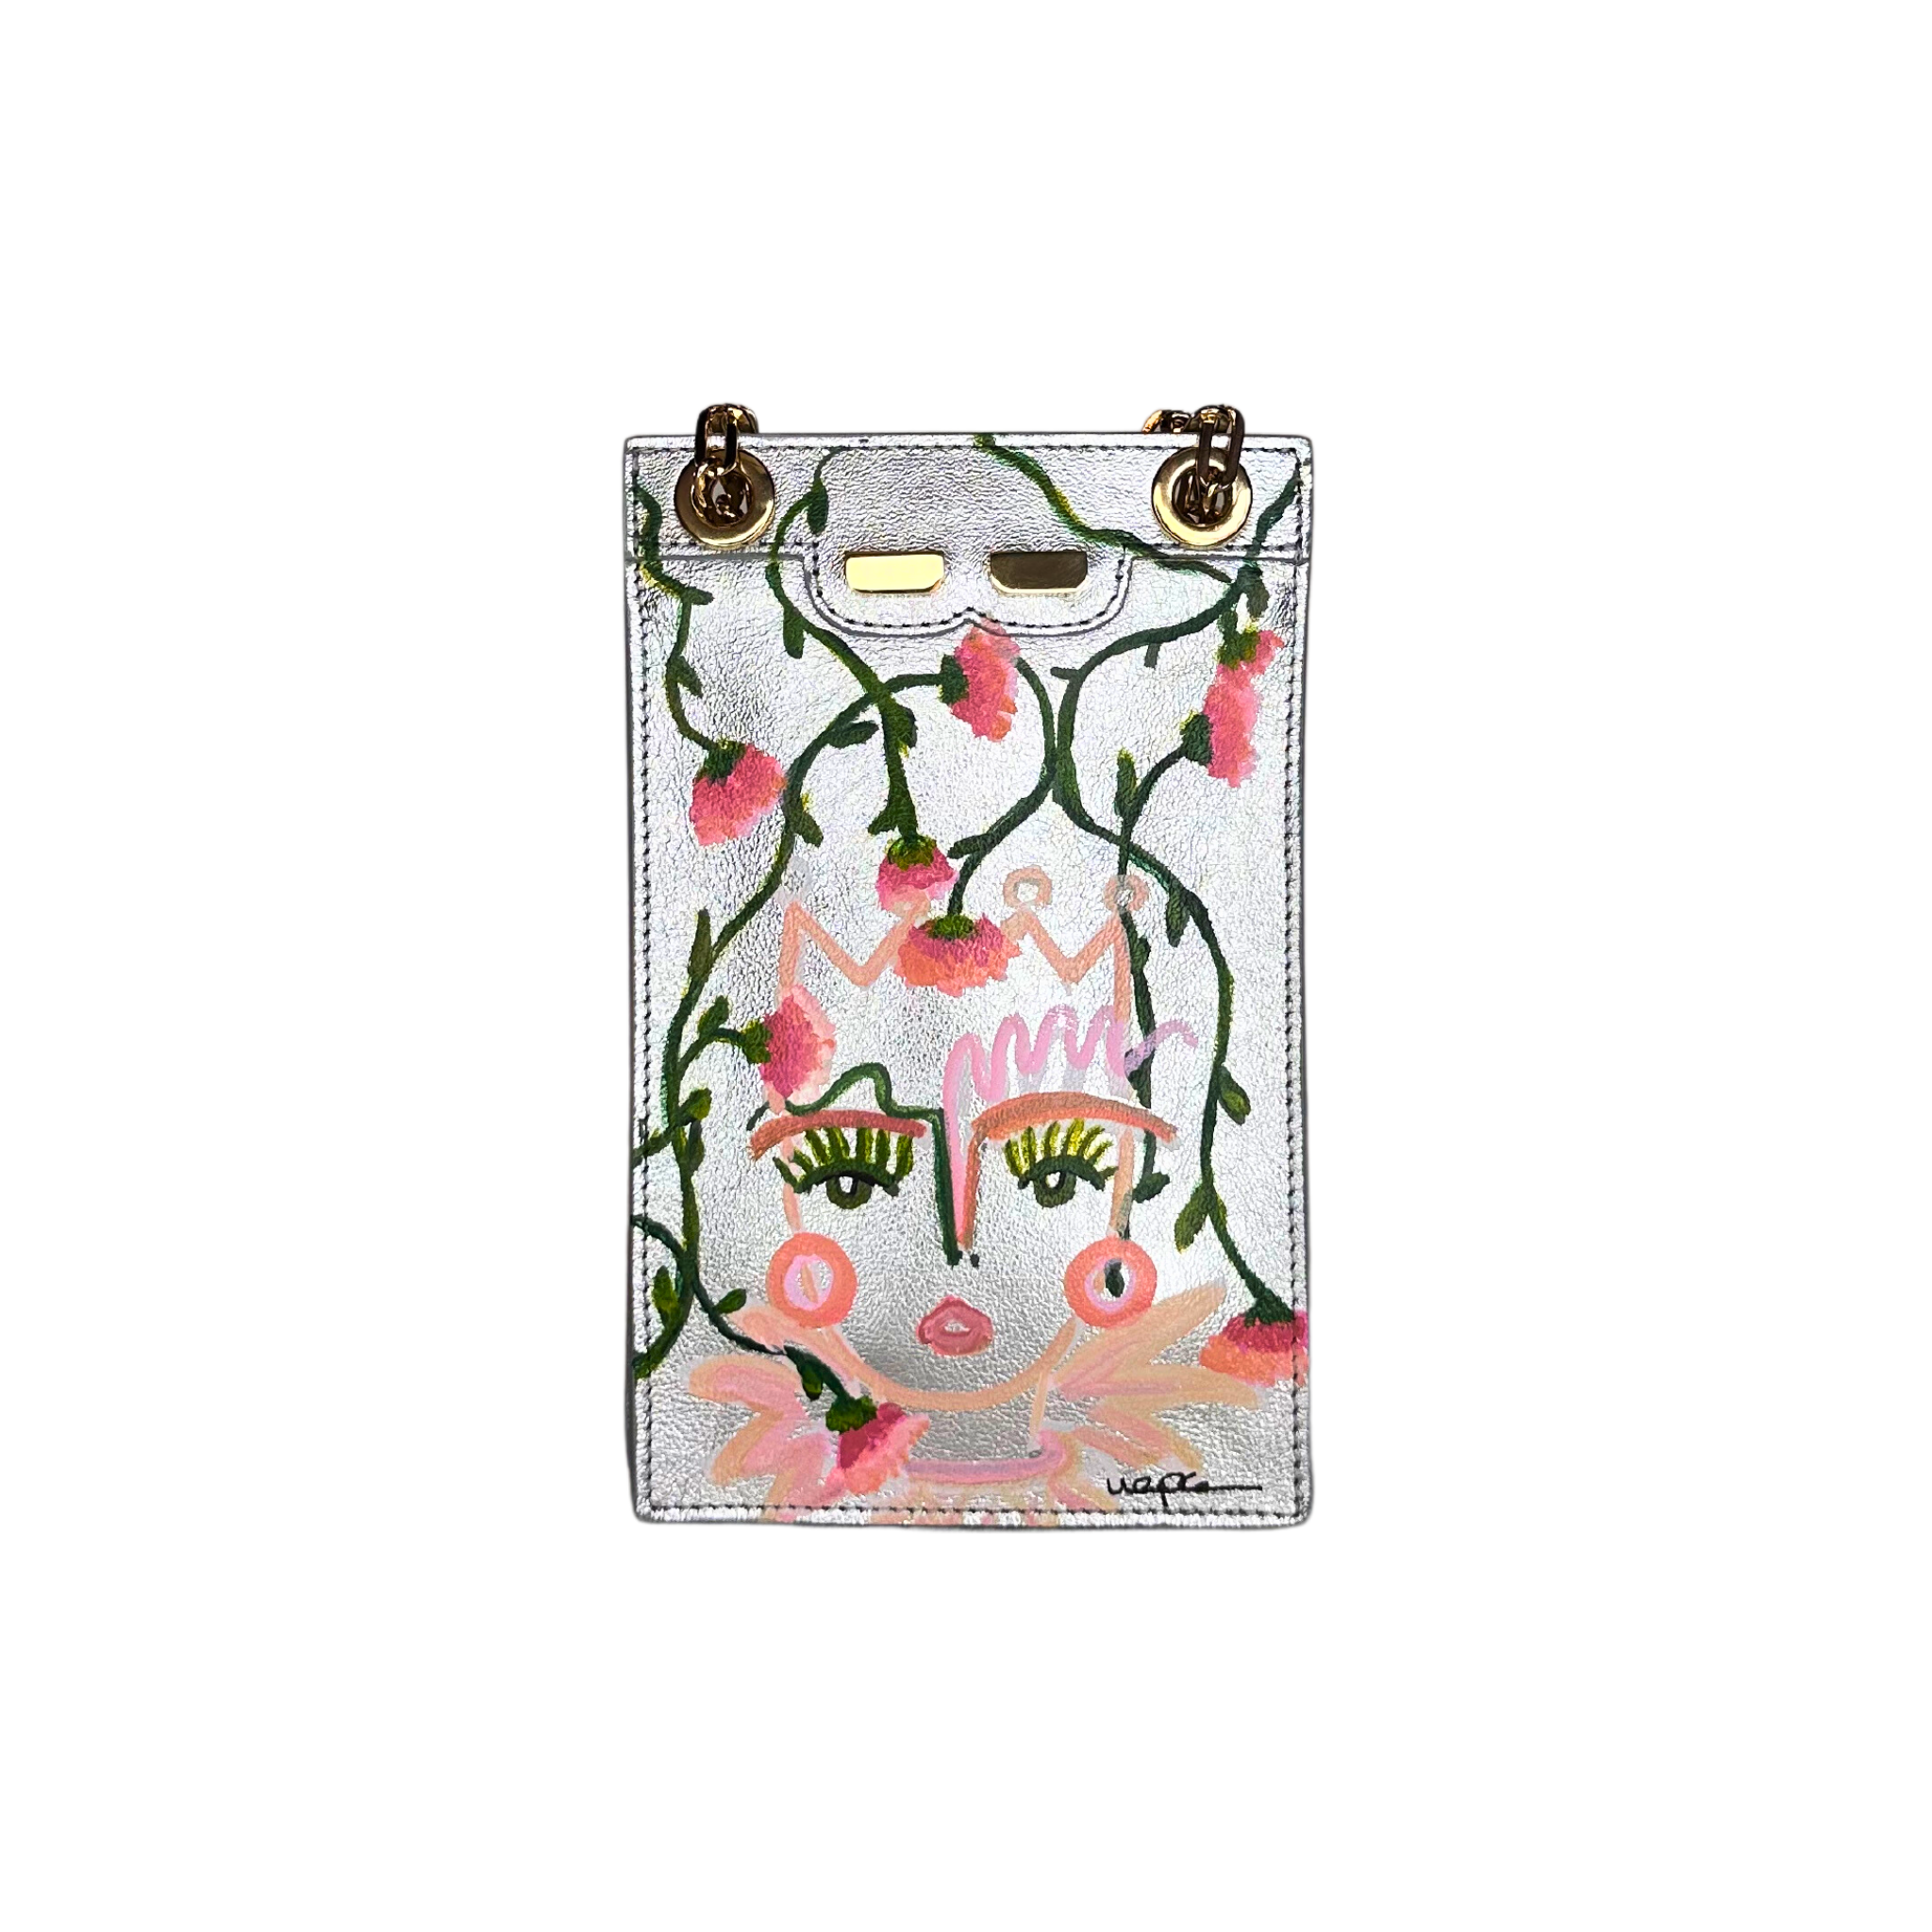 Catherine Cellphone Pouch in Silver